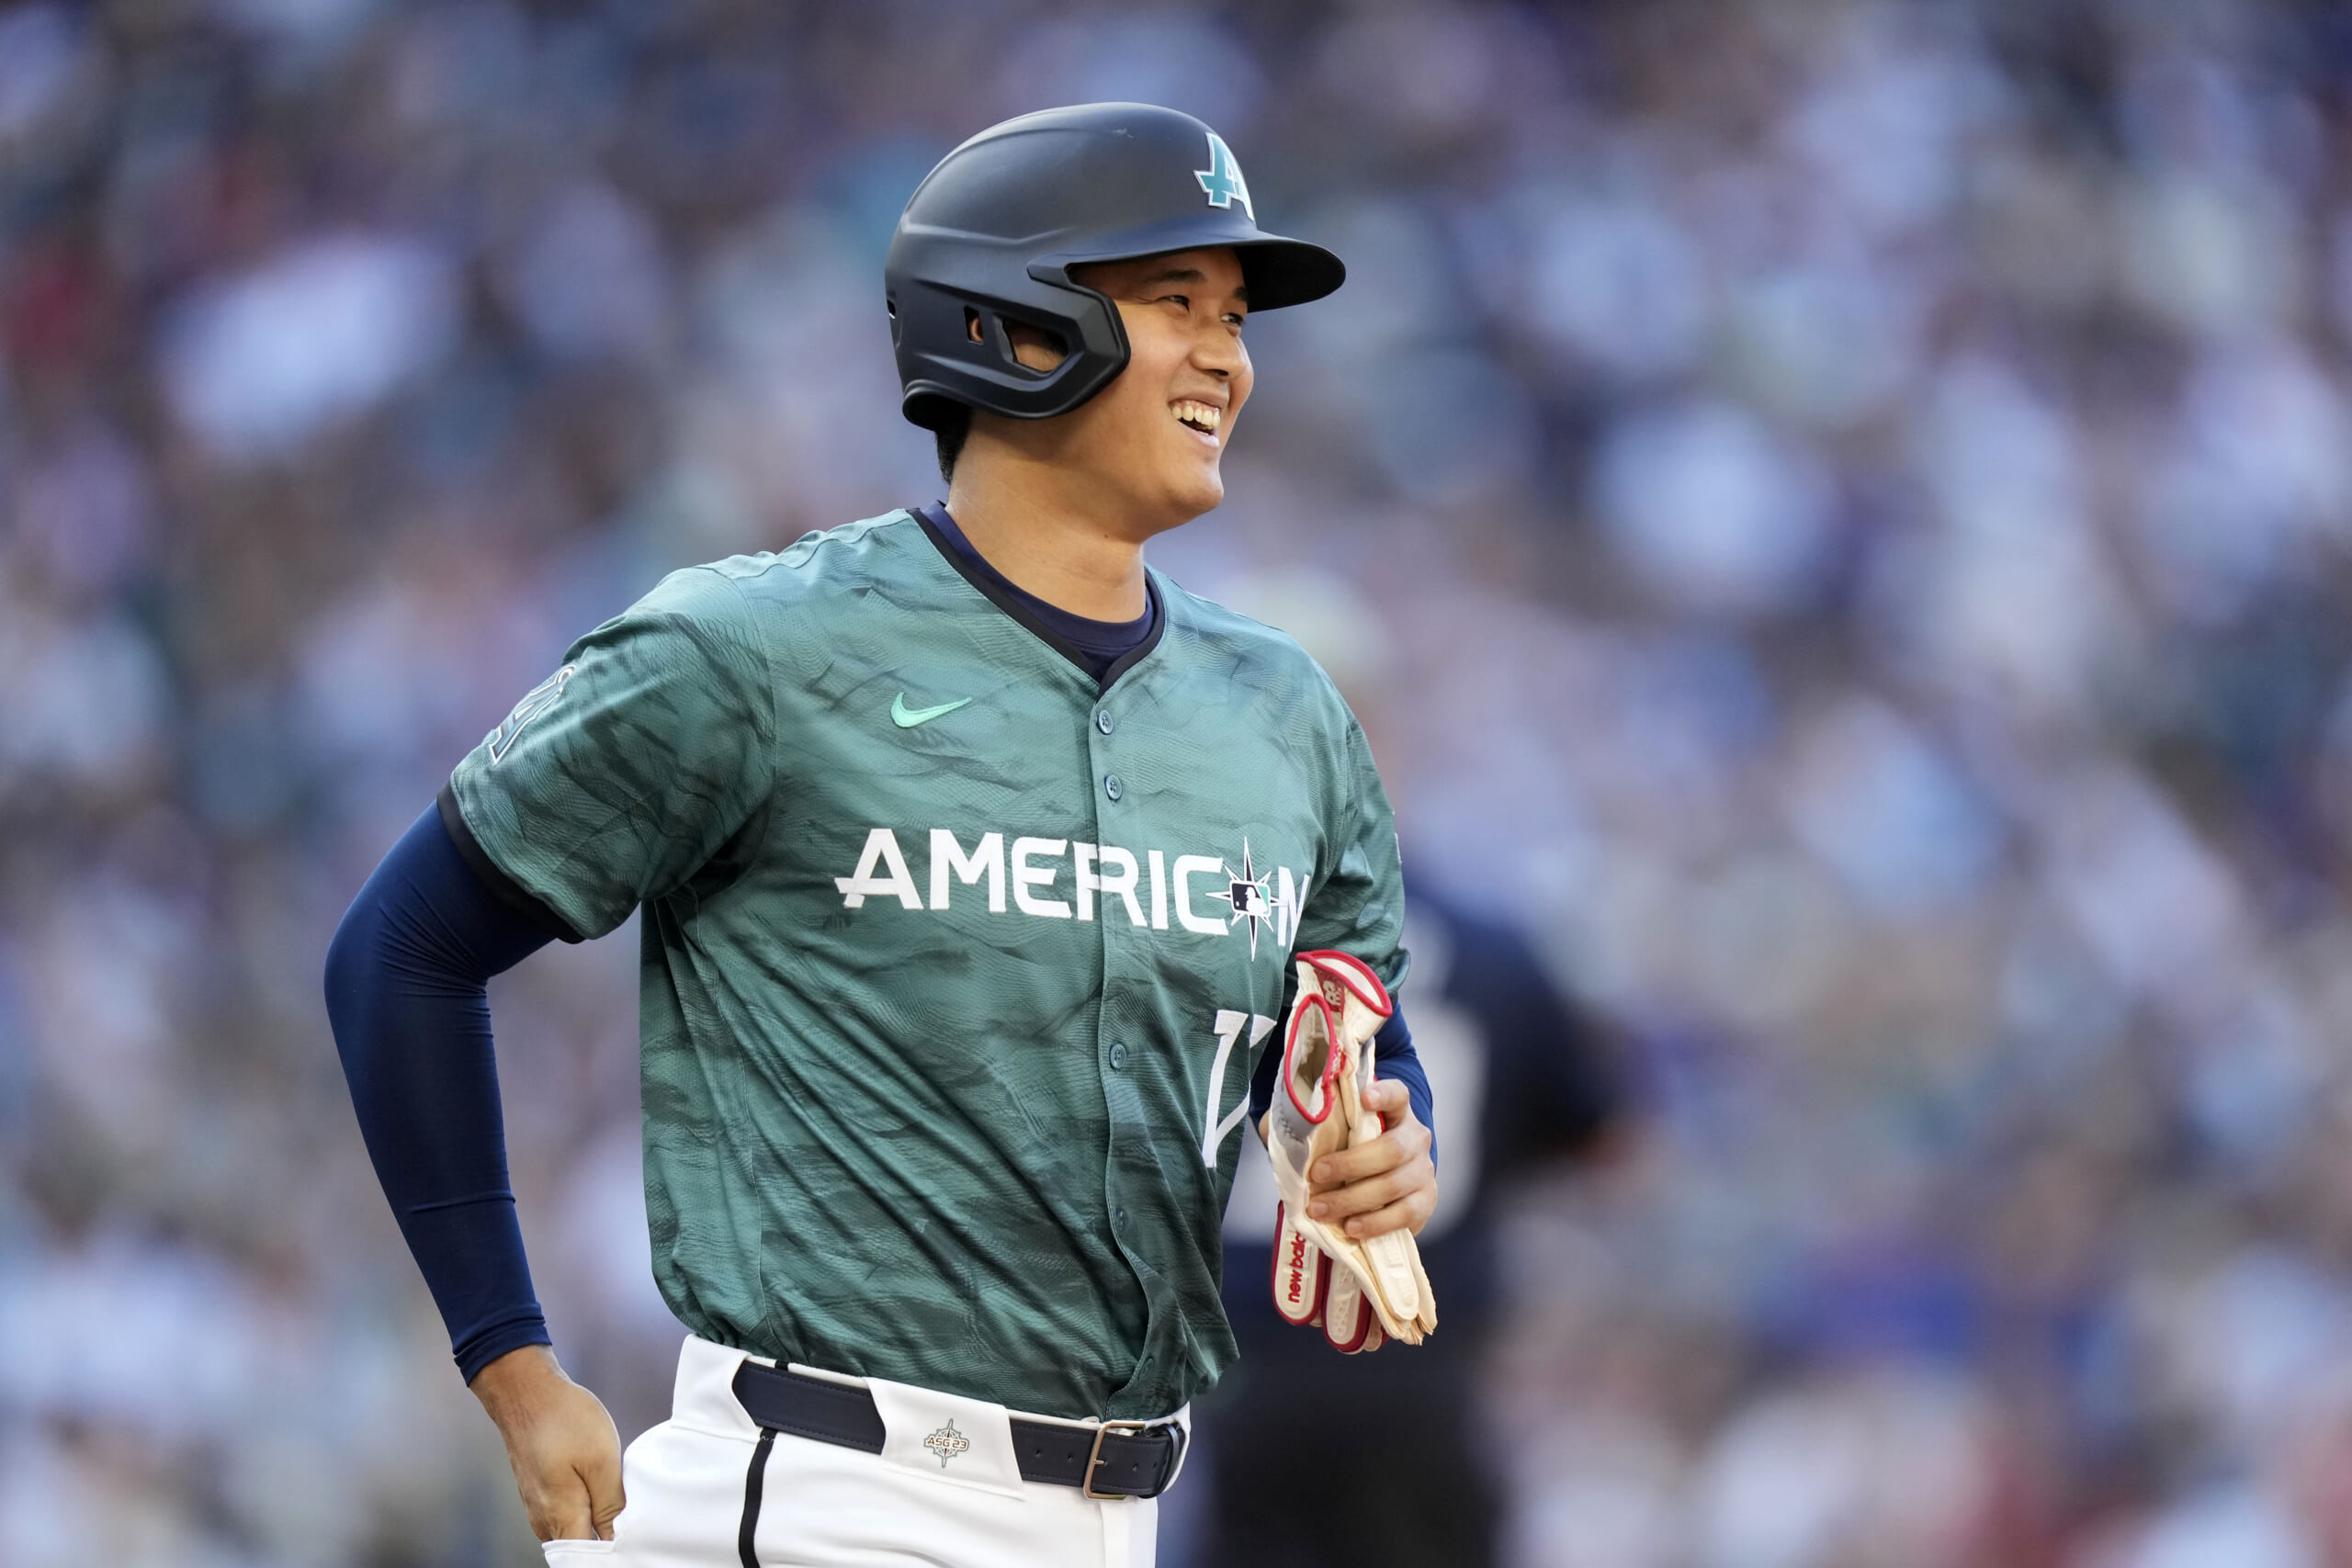 Yankees Player NOT HAPPY, Wants A Trade!? Mike Trout & Ohtani Go